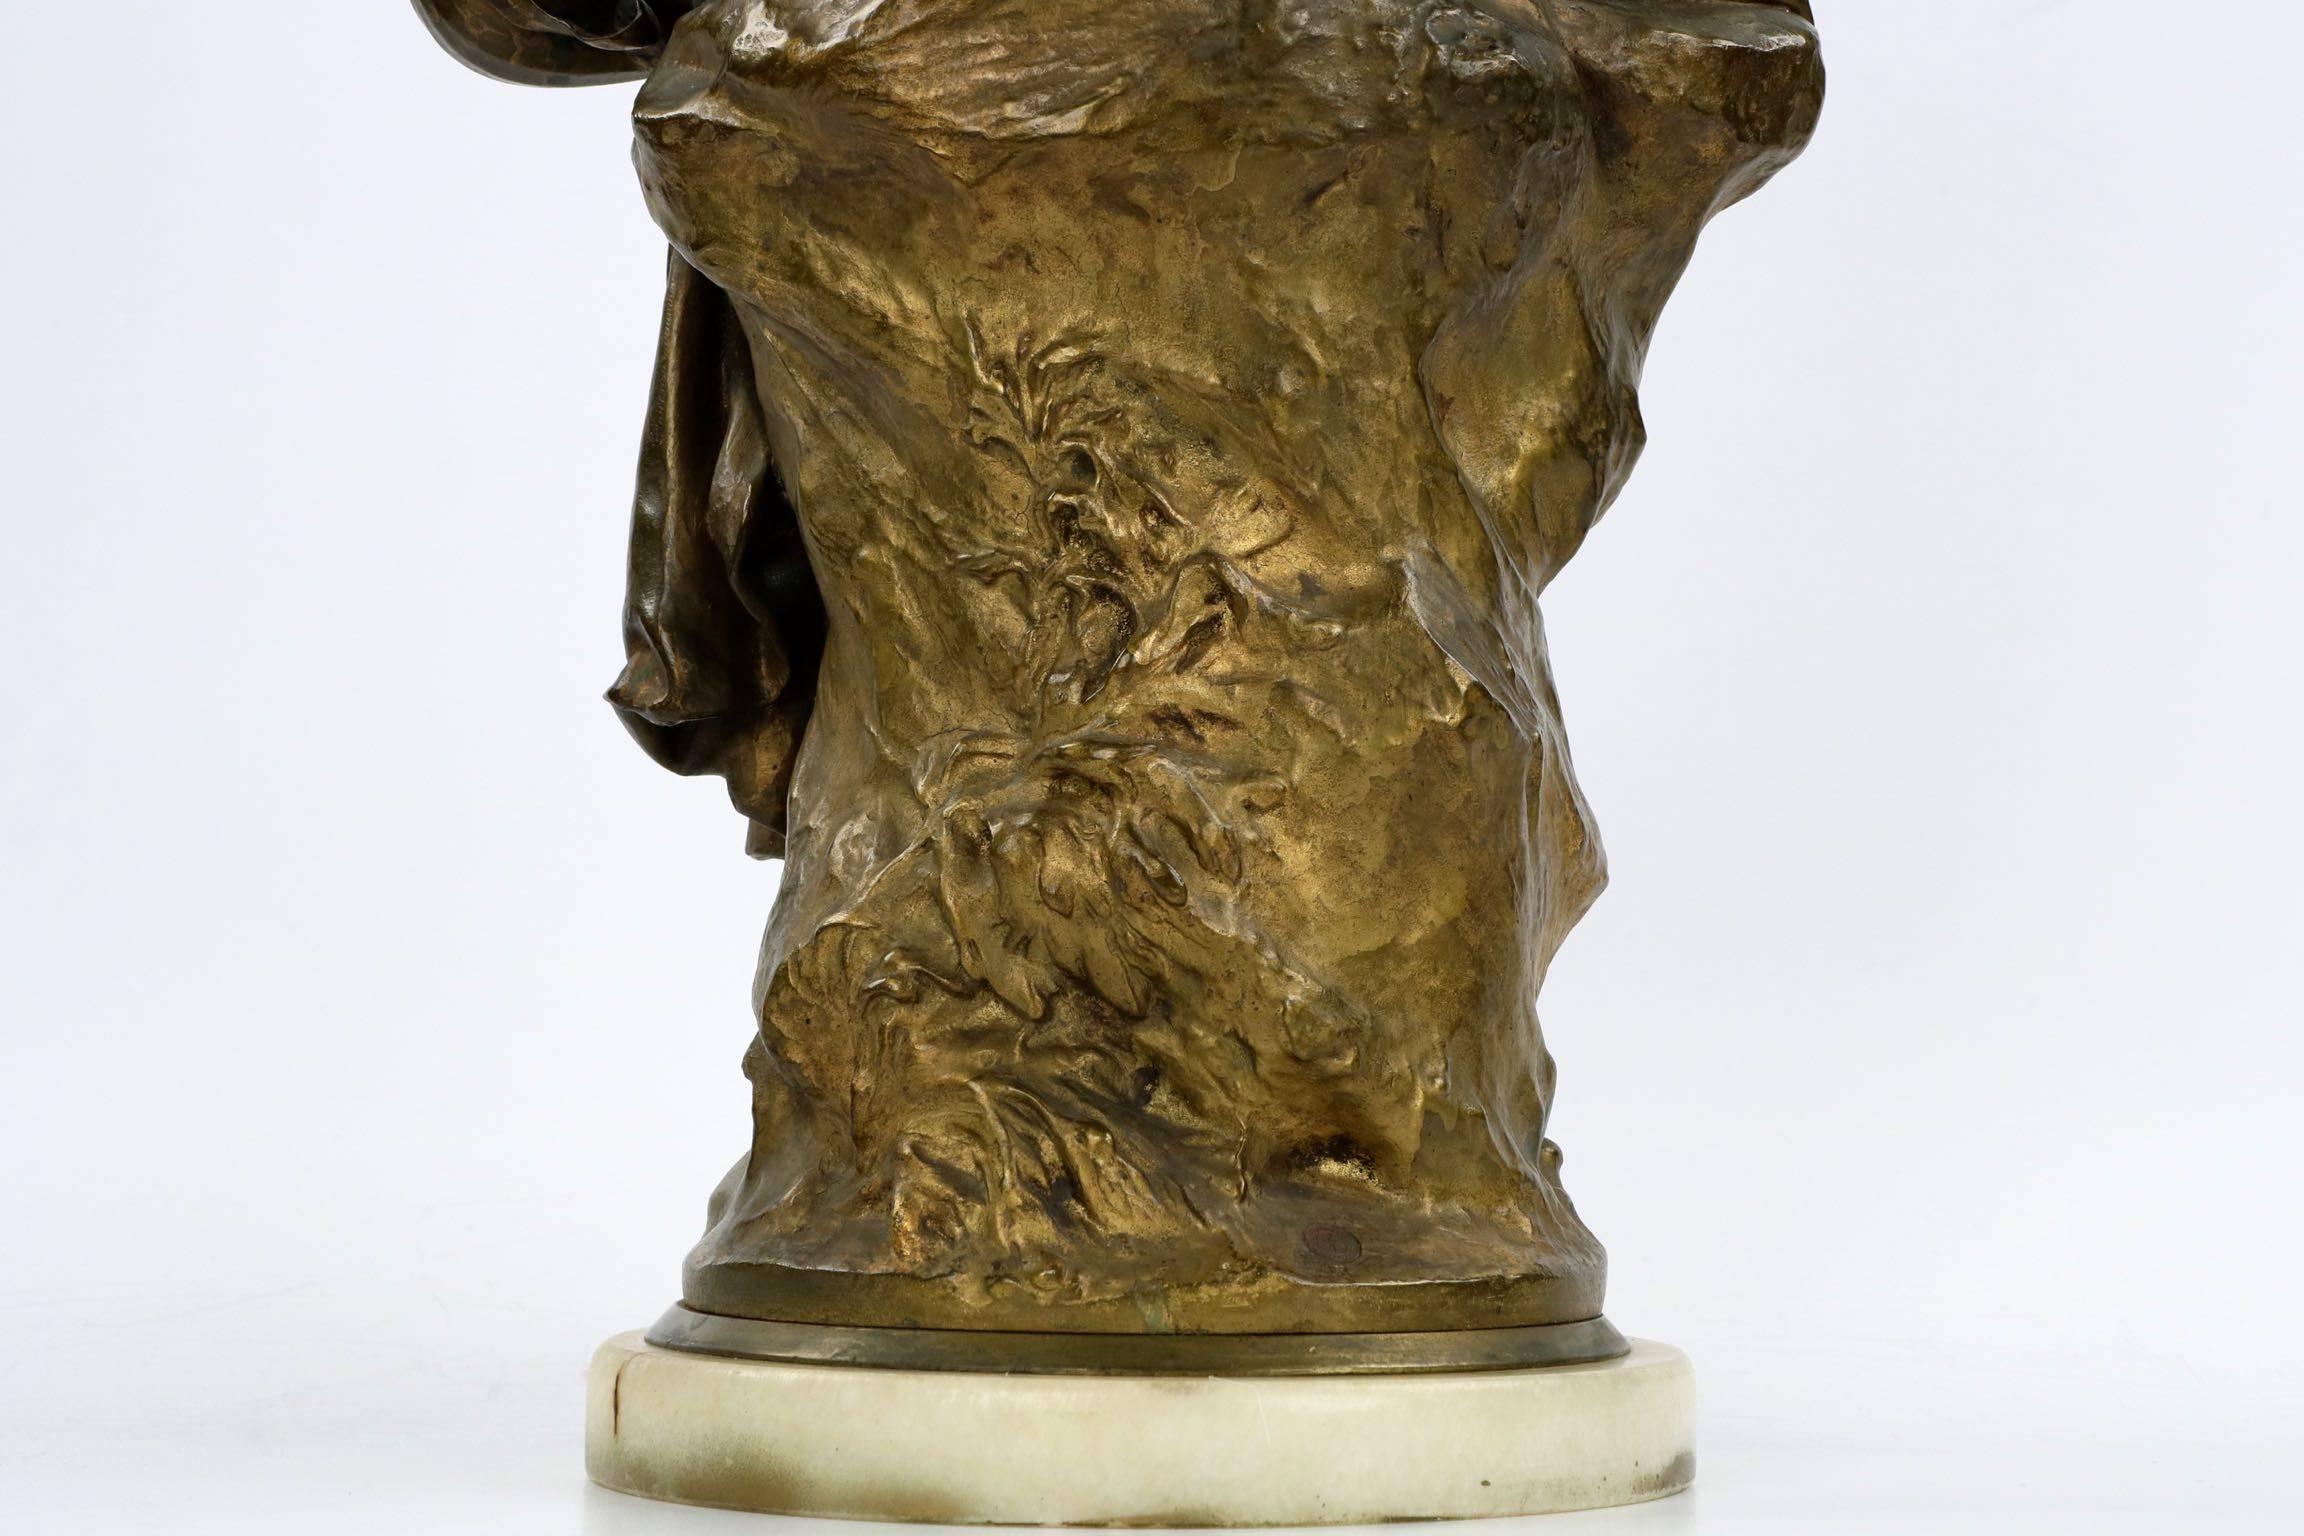 Paul Mengin (French, 1853-1937) Gilded Bronze Sculpture of Mignon by Susse 1